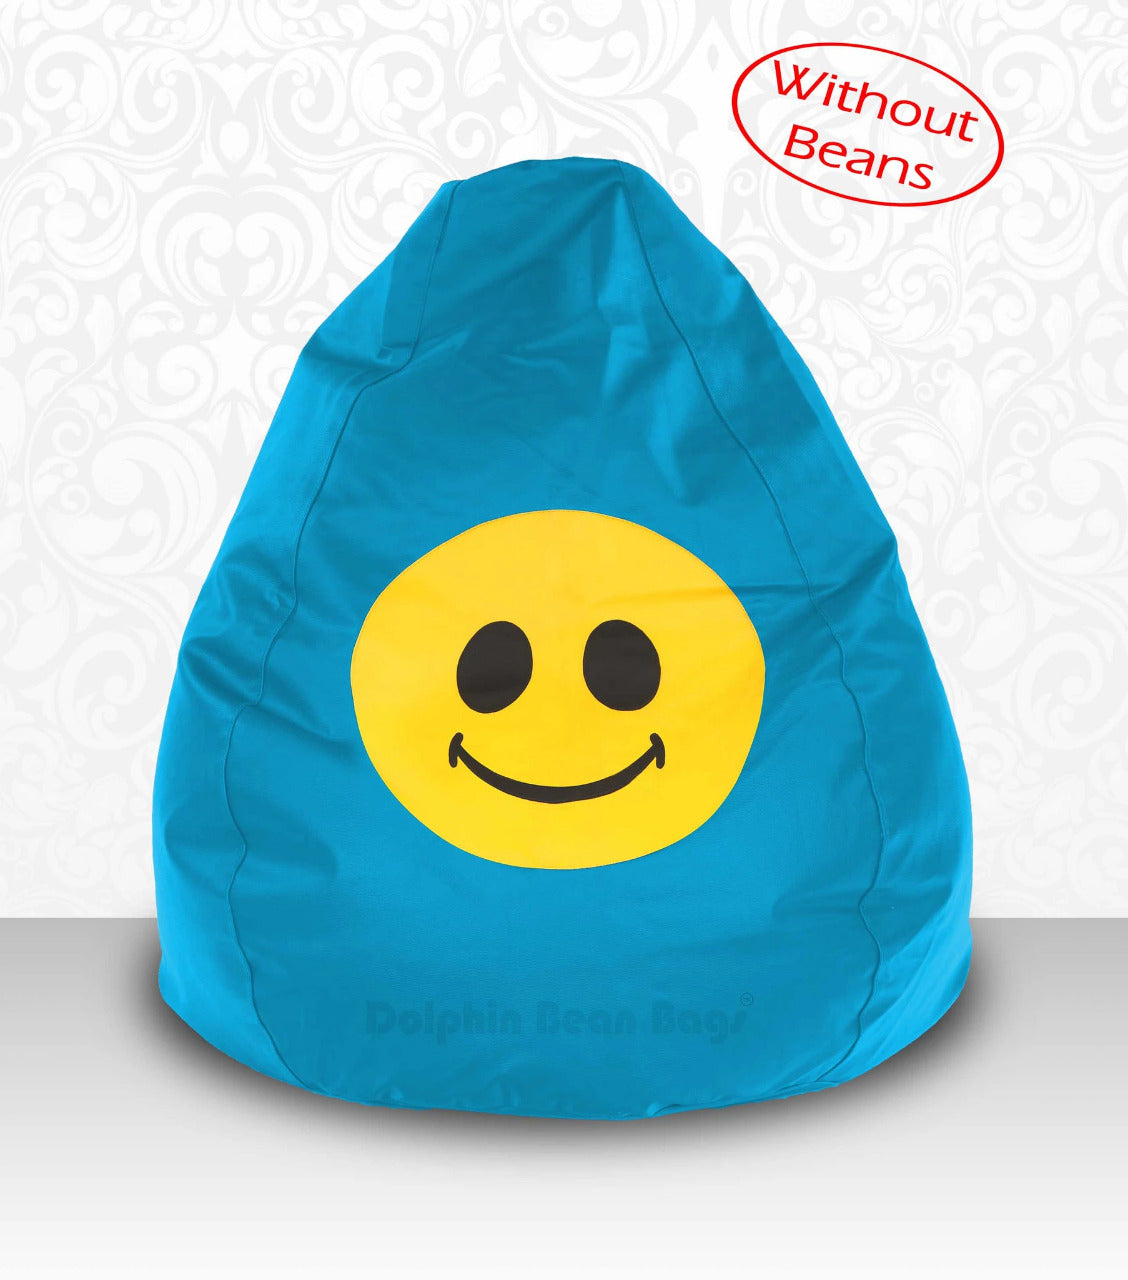 Bean Bag: XXL Bean Bag Turquoise-Smiley-COVERS(without Beans)